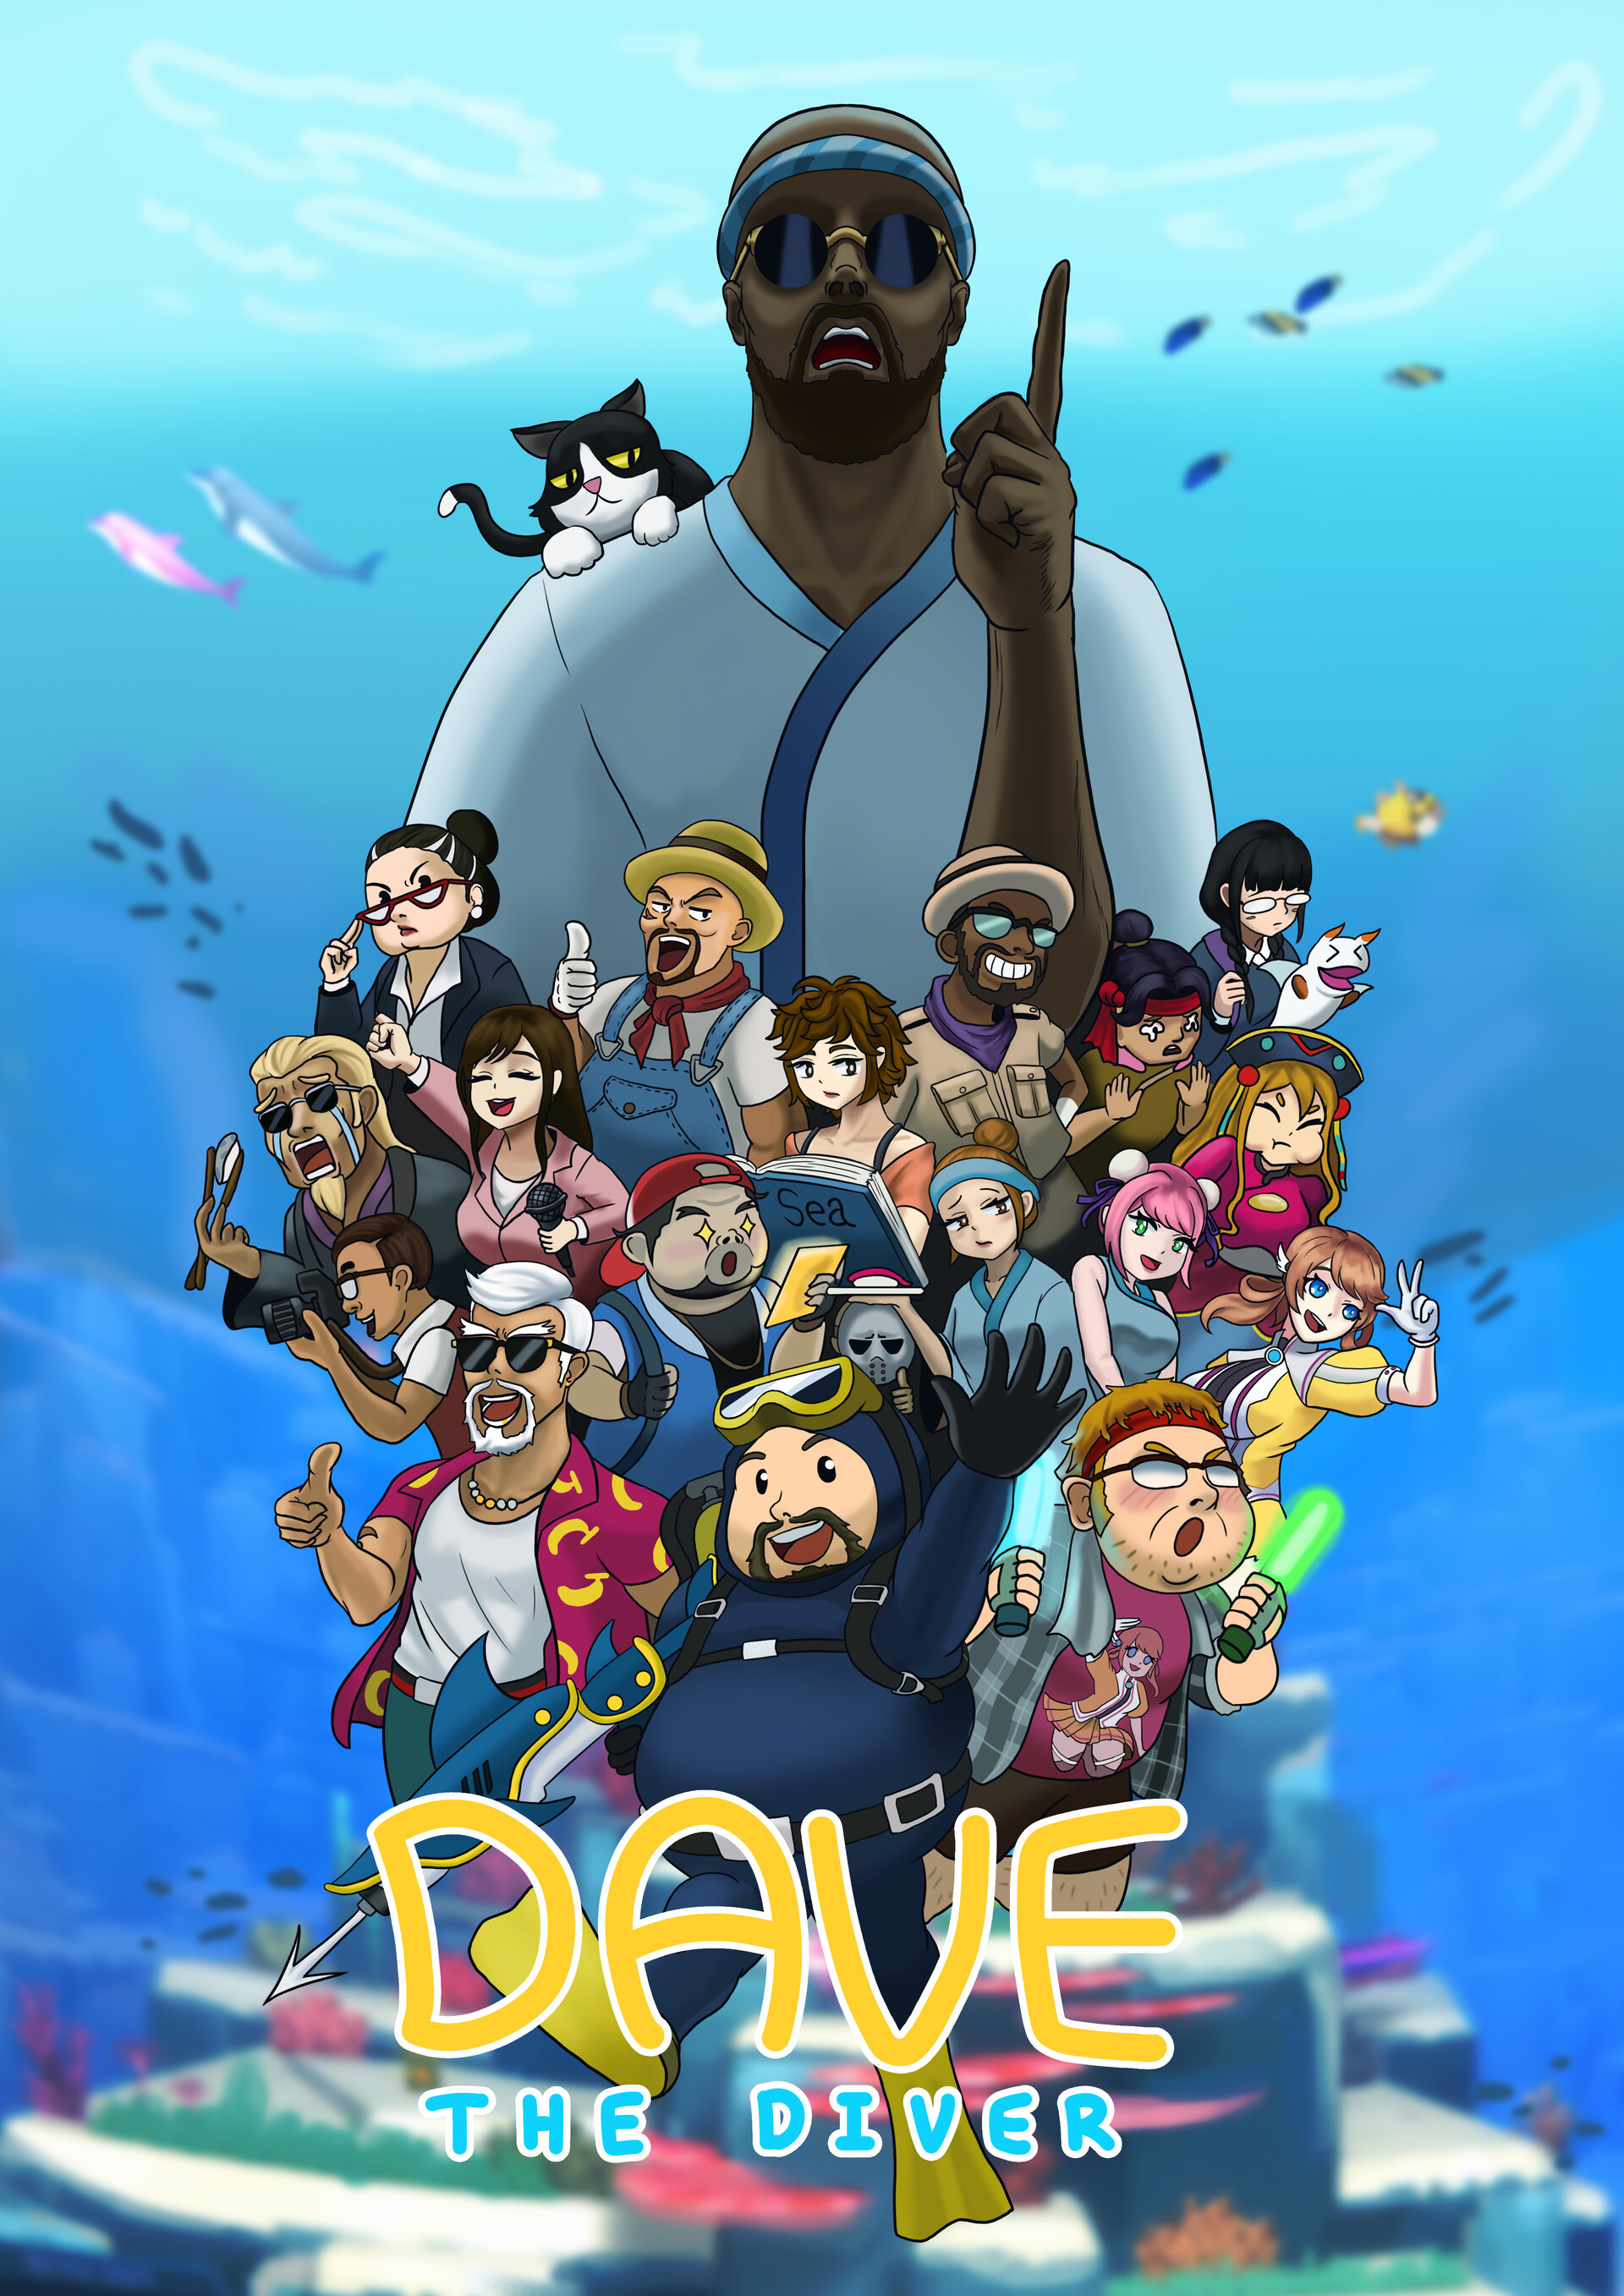 Dave the daver. Dave the Diver. Dave the Diver игра обложка. Dave the Diver Ellie. Dave the Diver: Deluxe Edition.